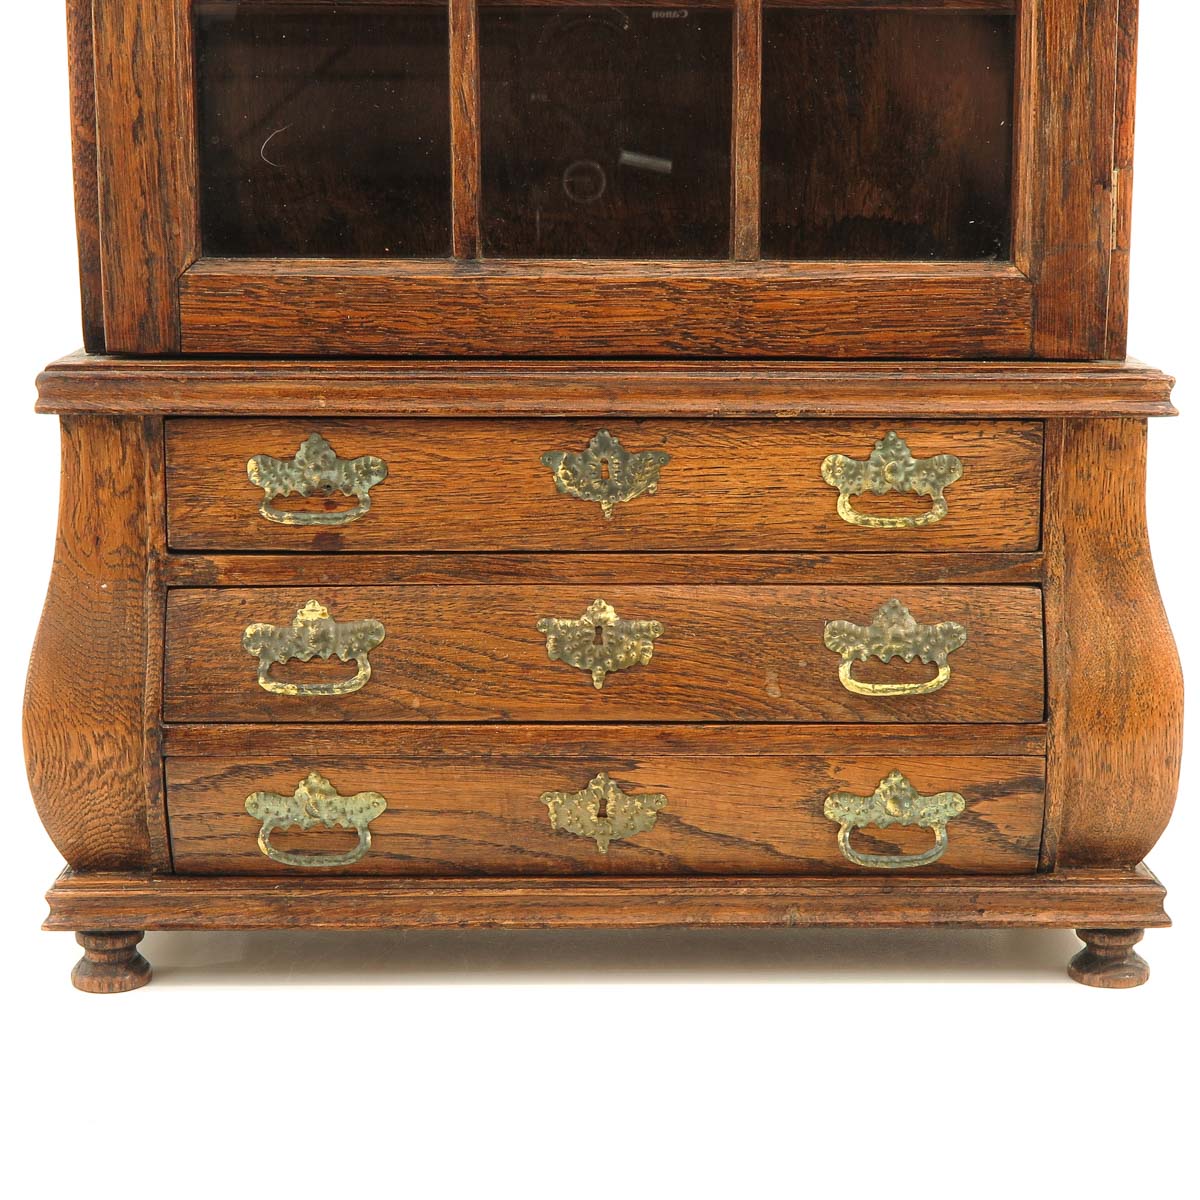 A Miniature Cabinet - Image 7 of 10